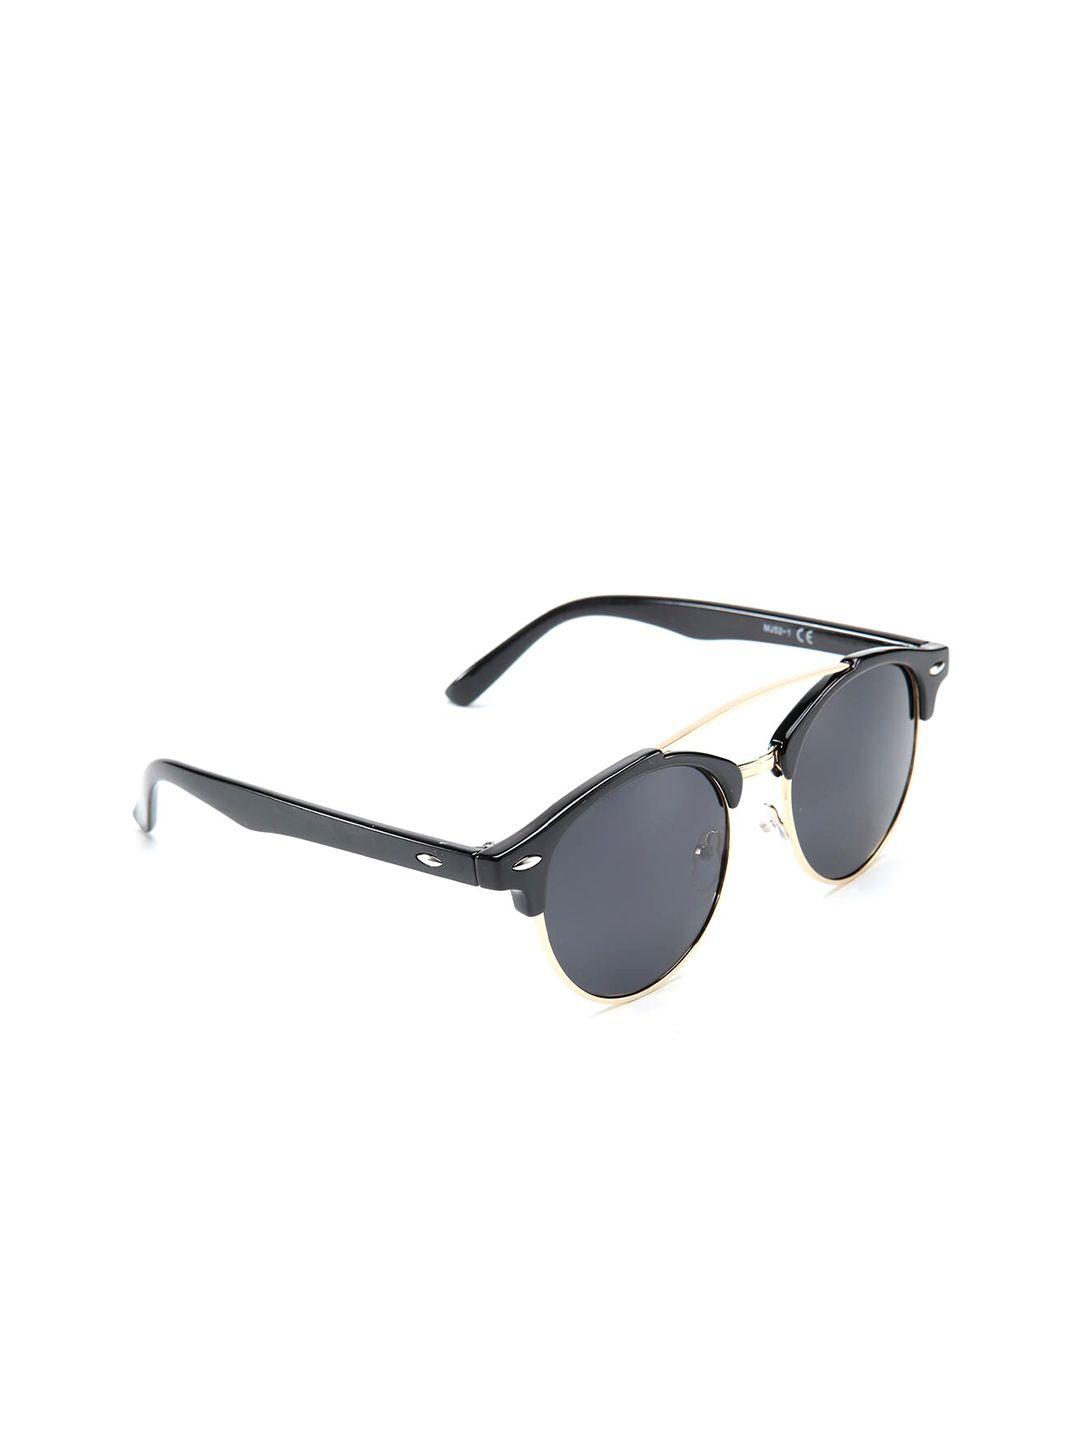 intellilens unisex grey lens & black round sunglasses with polarised and uv protected lens 1000000060924